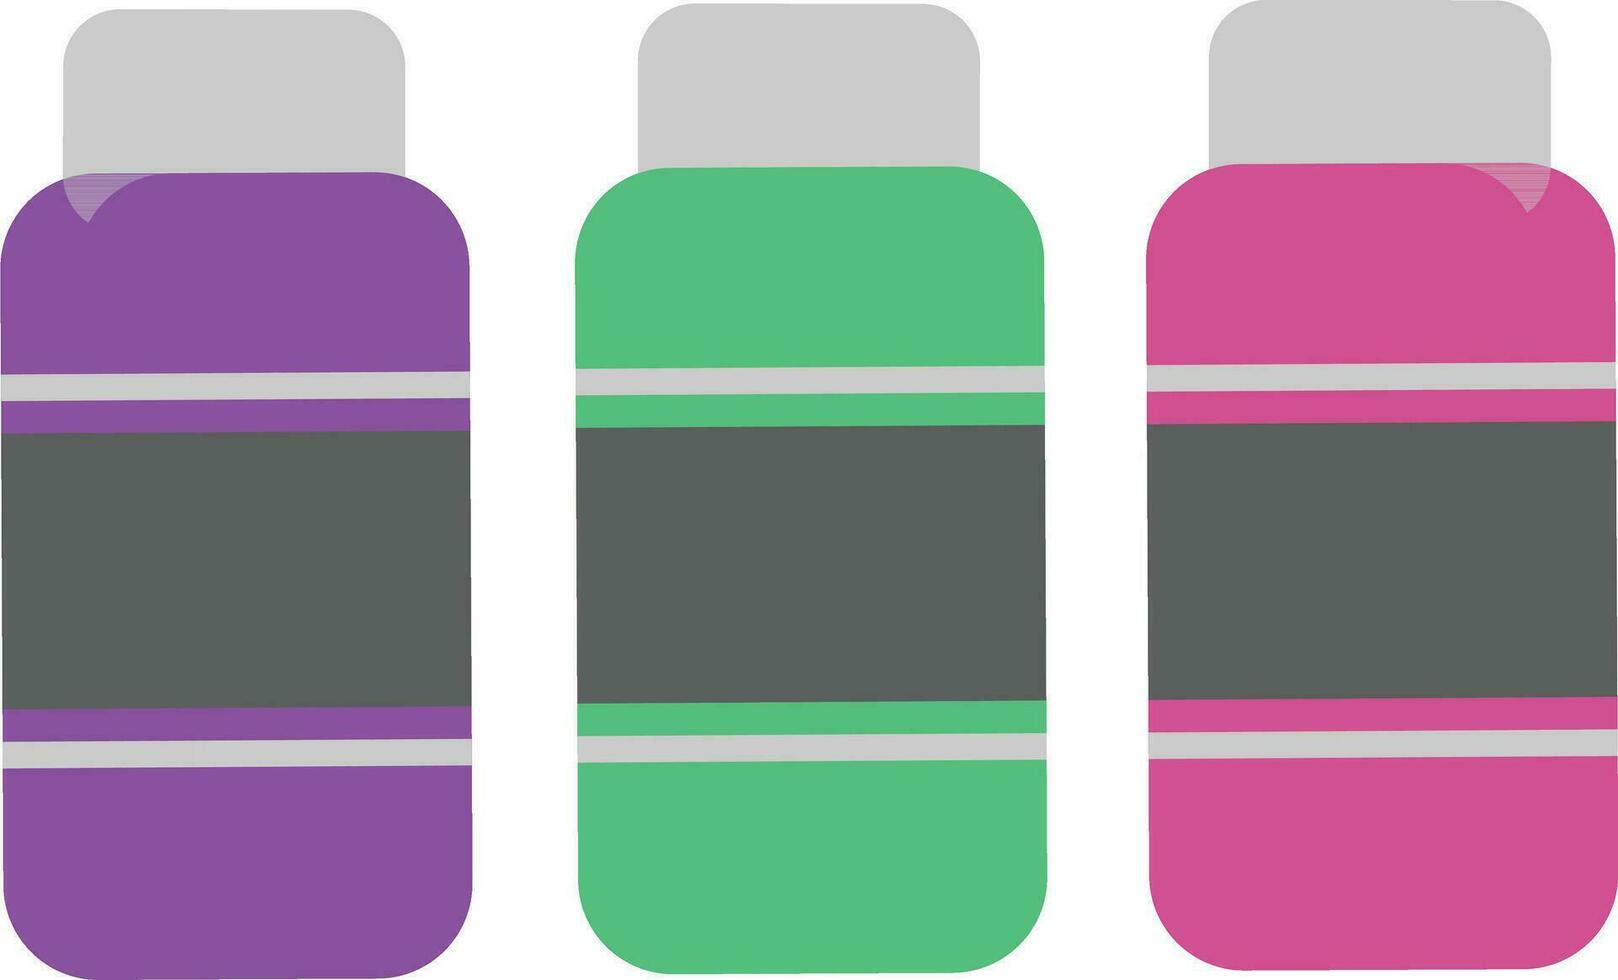 cosmetic bottle icon over white background. colorful design. vector illustration